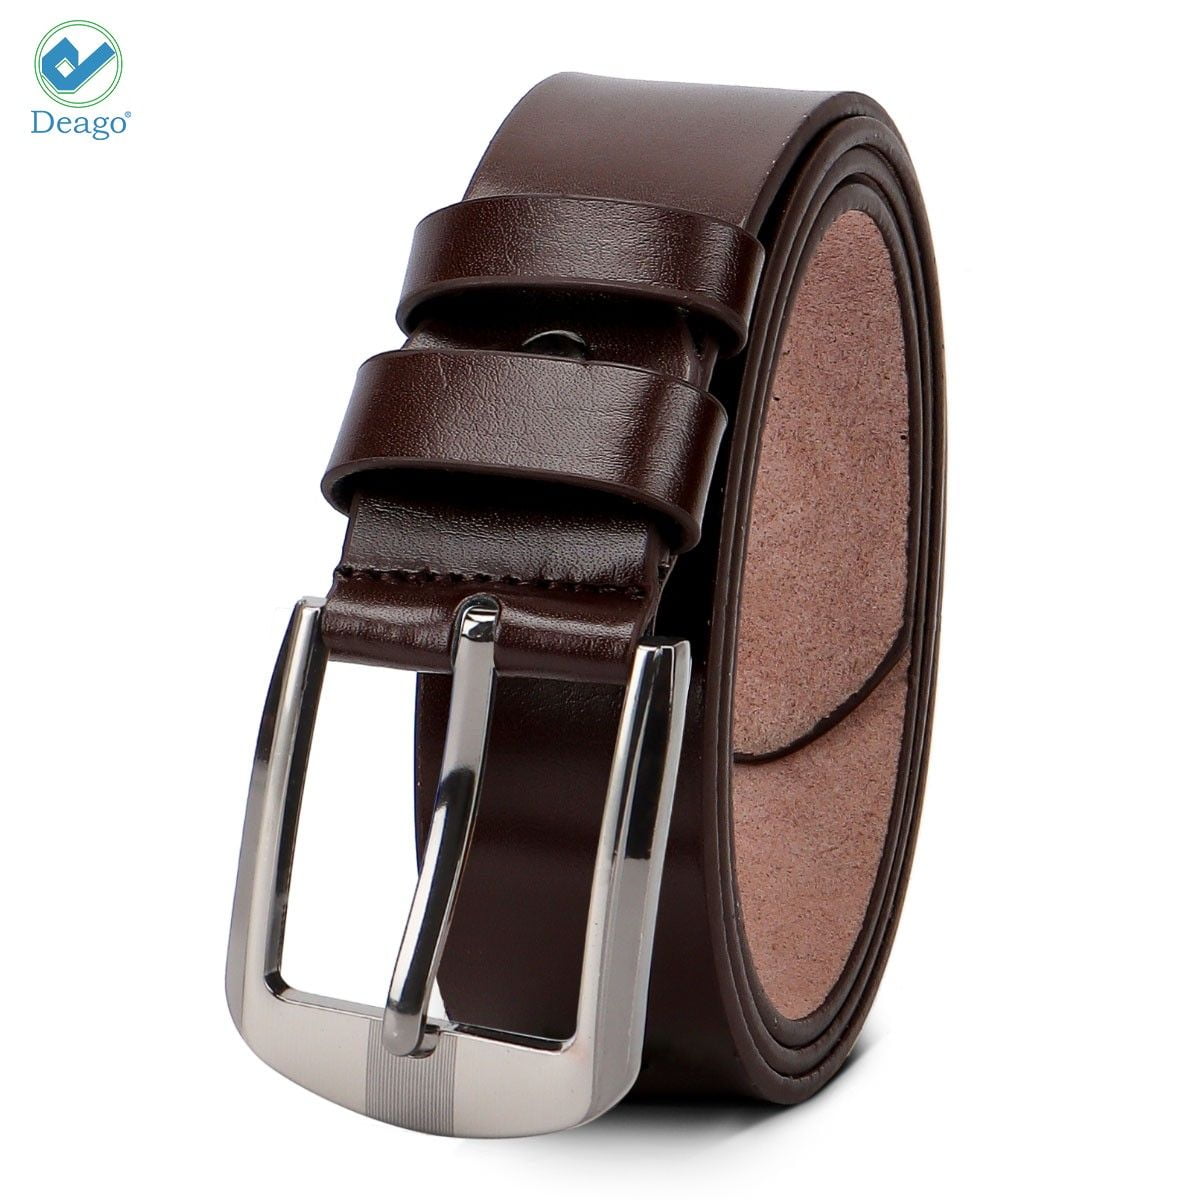 Deago Men's Casual Leather Jeans Belts Classic Work Business Dress Belt  with Prong Buckle for Men 